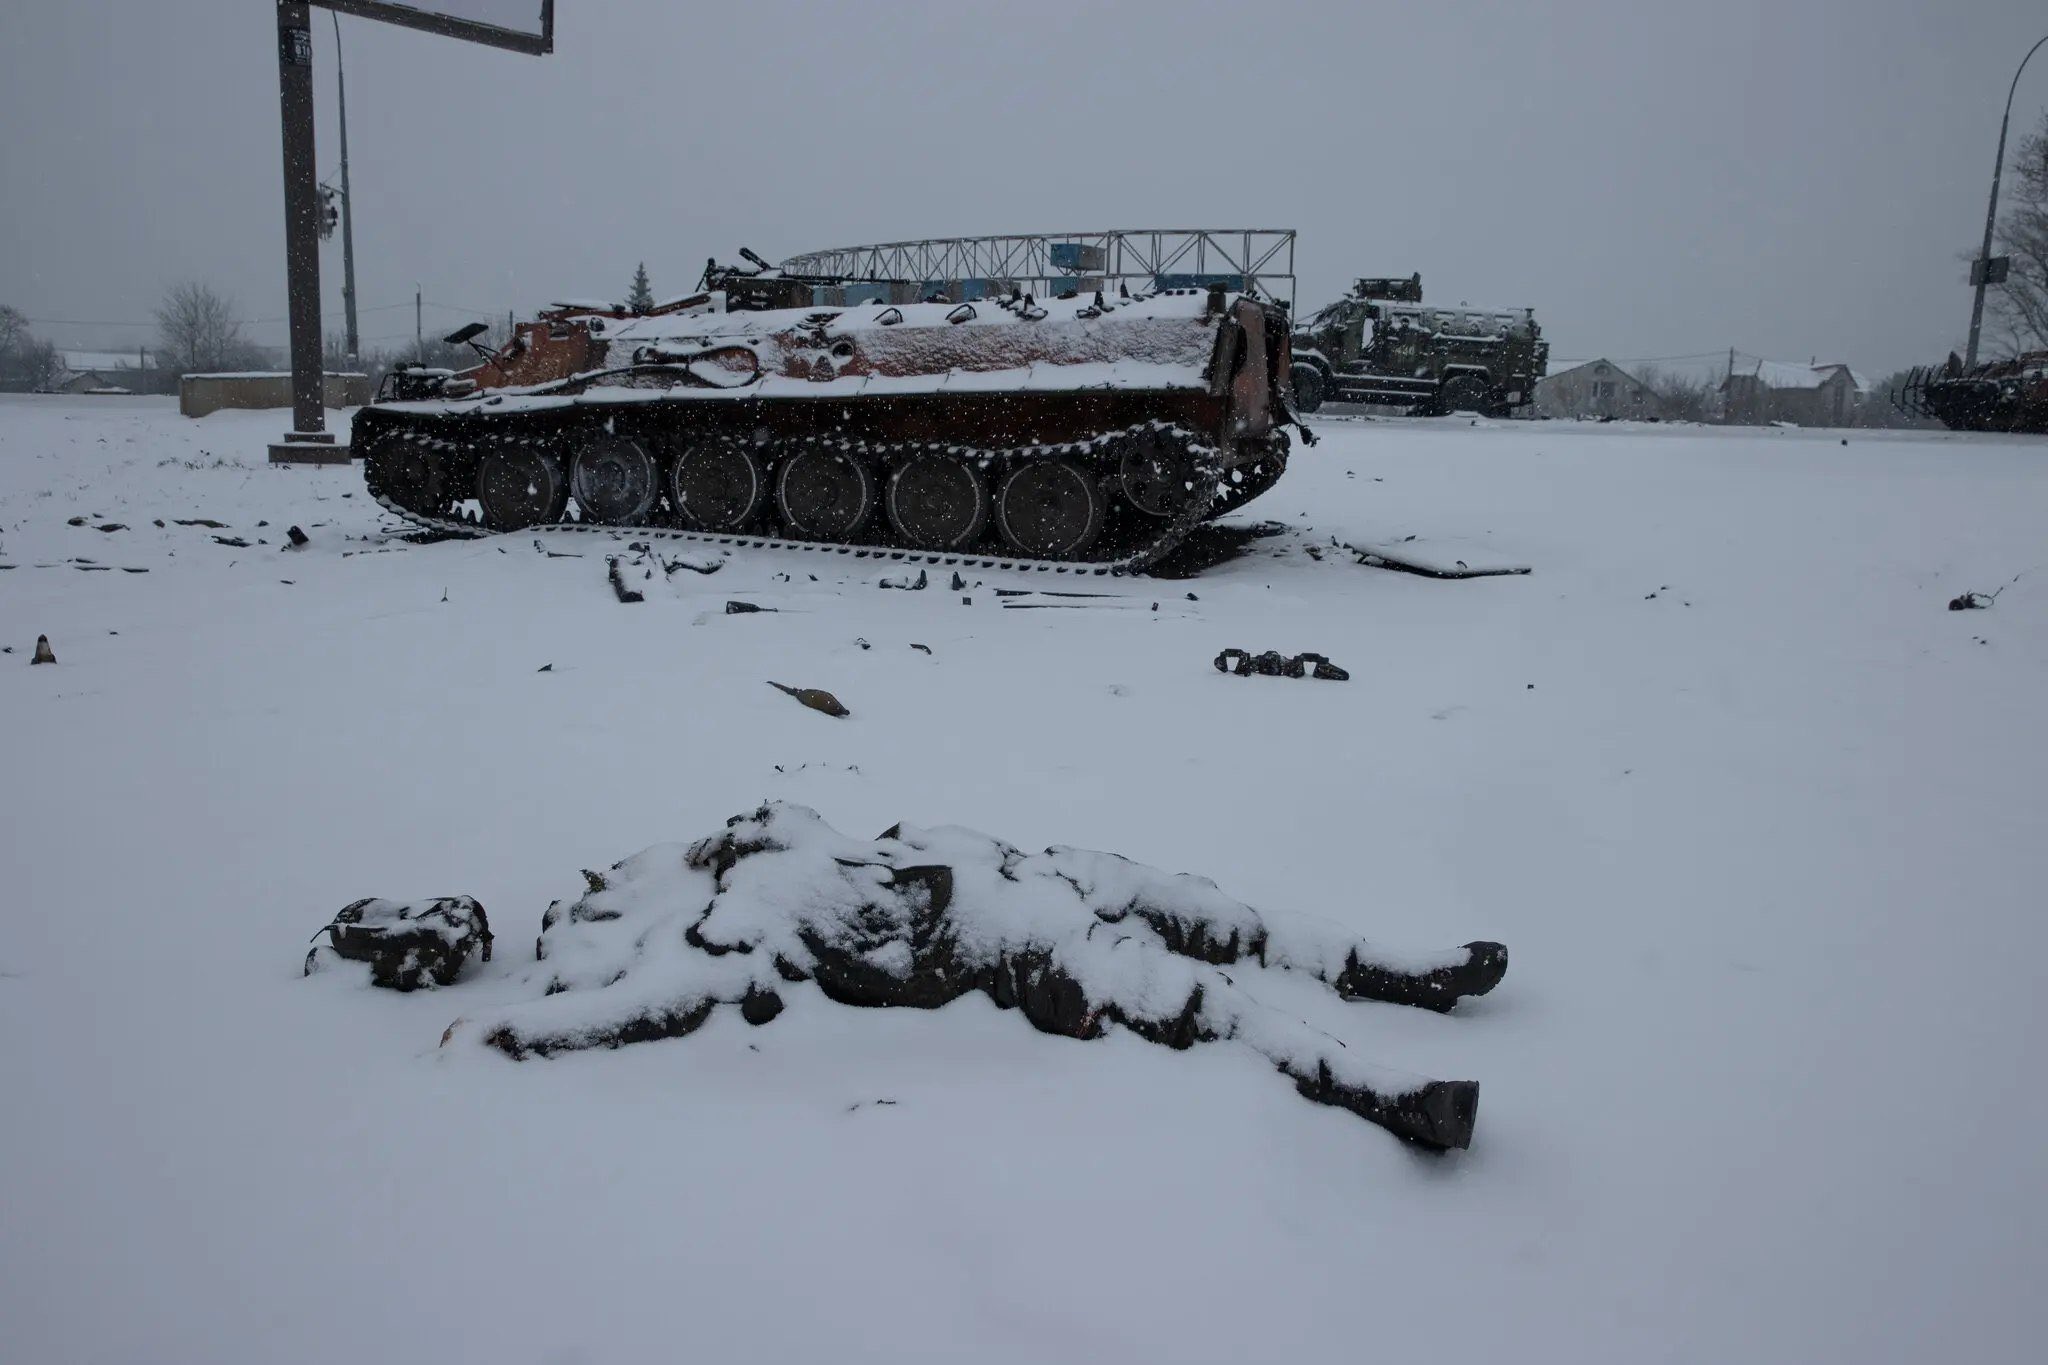 The corpse of a soldier covered in snow against the background of abandoned military equipment. Ukraine